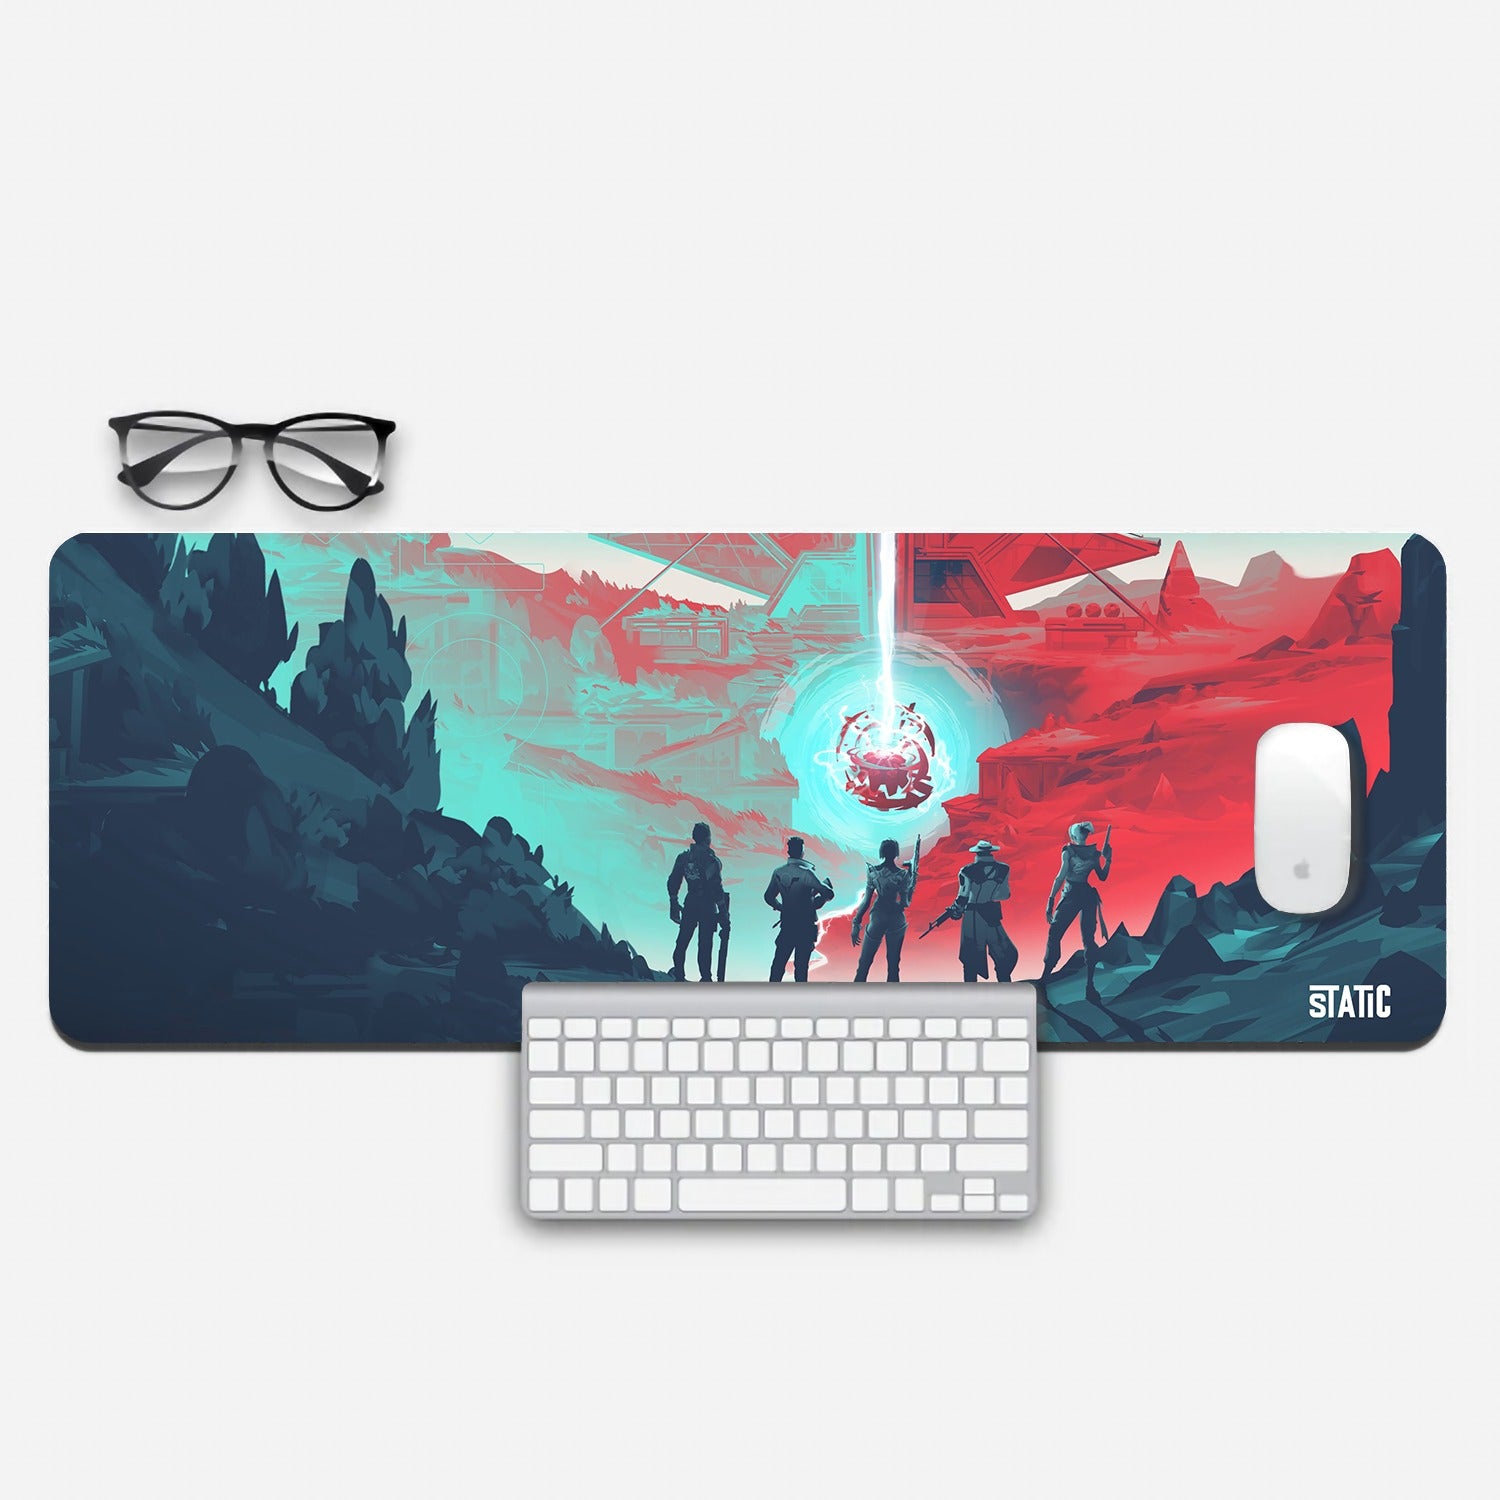 Upgrade your gaming setup with our Extended Gaming Mouse Pad, showcasing the Valorant agents in a post-apocalyptic showdown. Witness the clash between vibrant blue and fiery red in a wasteland landscape, with a central orb emitting a dazzling white beam. Immerse yourself in Valorant's thrilling world and elevate your gaming precision. Level up your game with this epic mouse pad today!